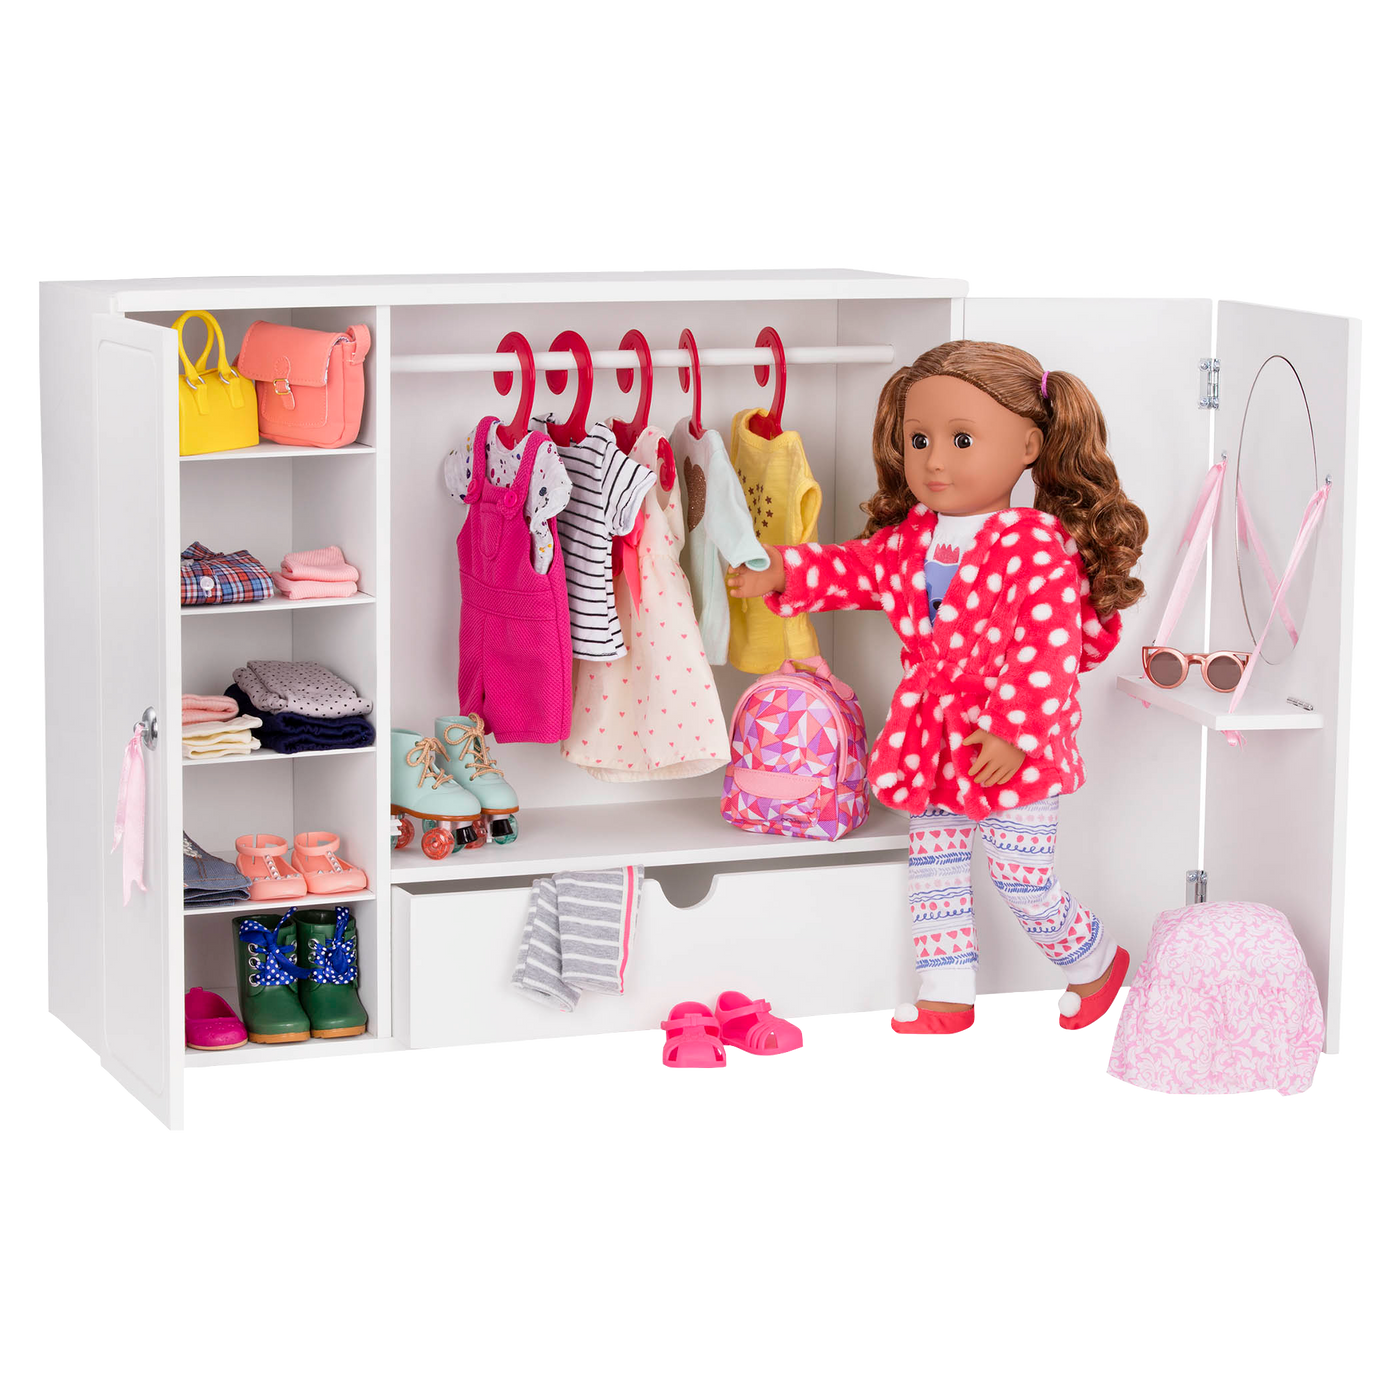 Isa and clothing inside the Wooden Wardrobe Closet for 18-inch Dolls